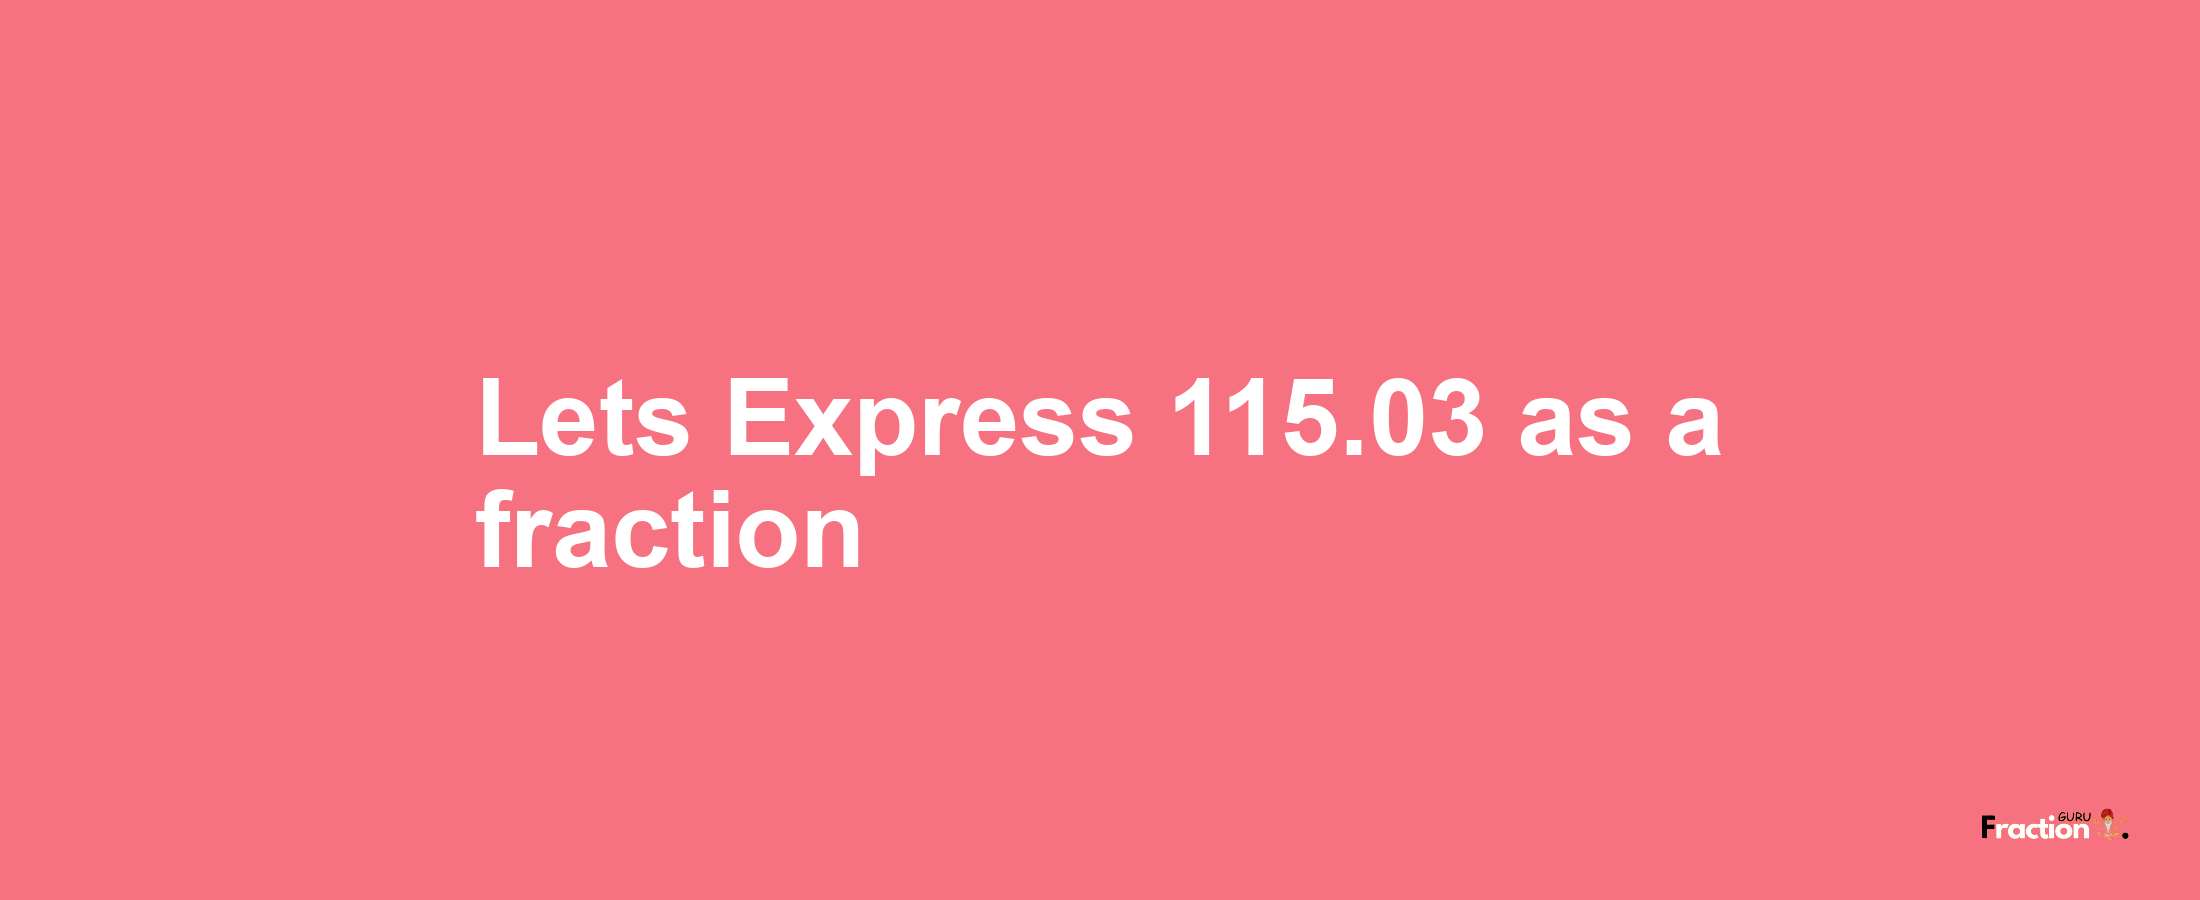 Lets Express 115.03 as afraction